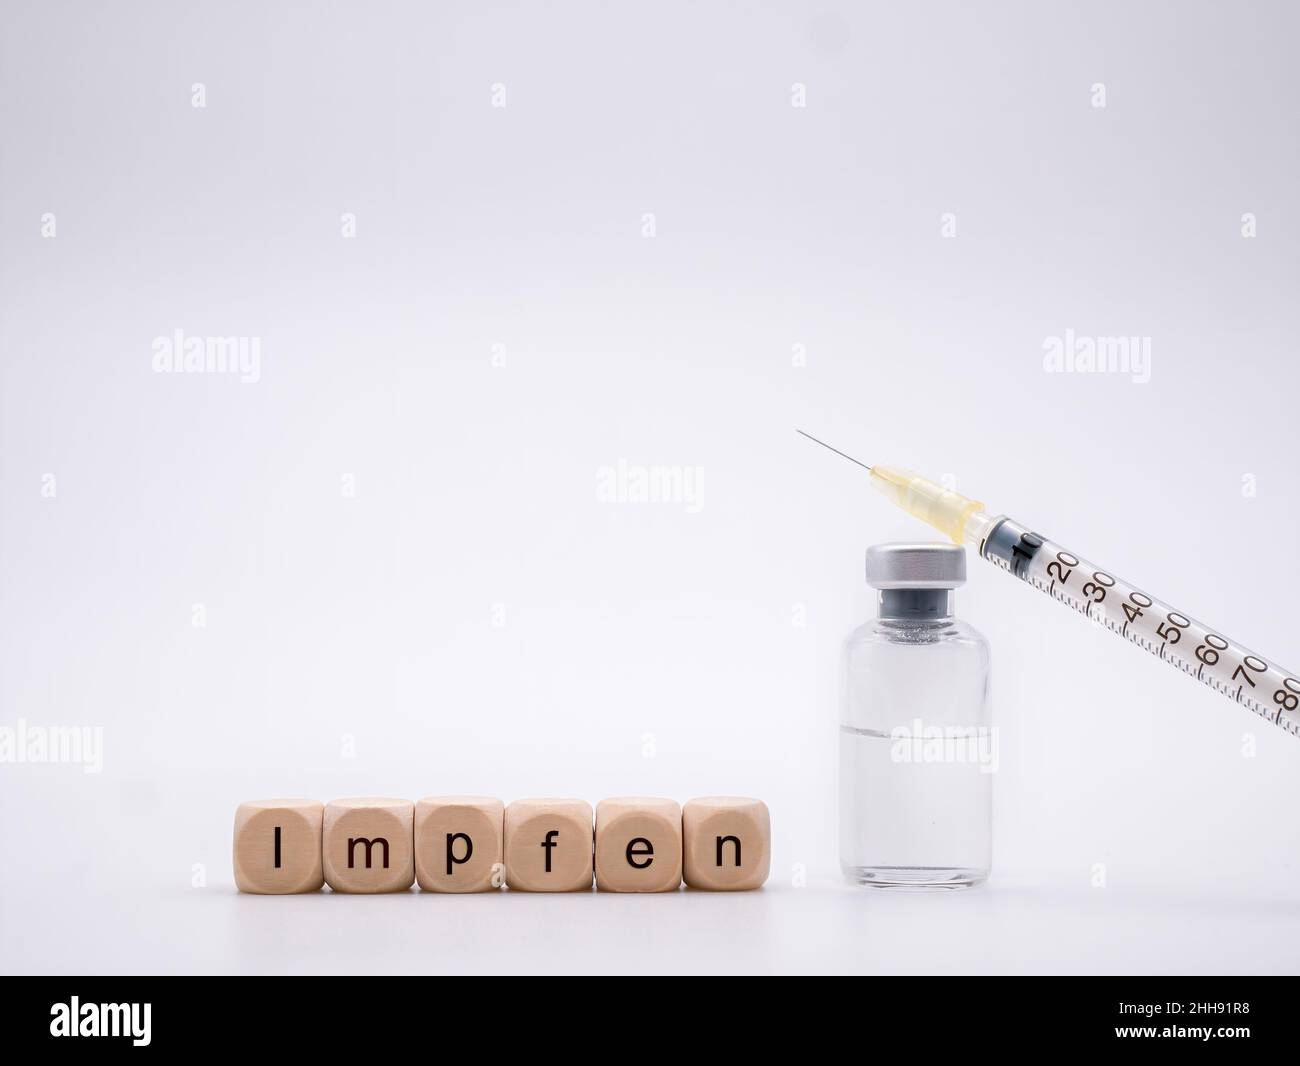 Letters 'Impfen' for German 'Vaccinate' with vaccine bottle and syringe isolated on white background Stock Photo